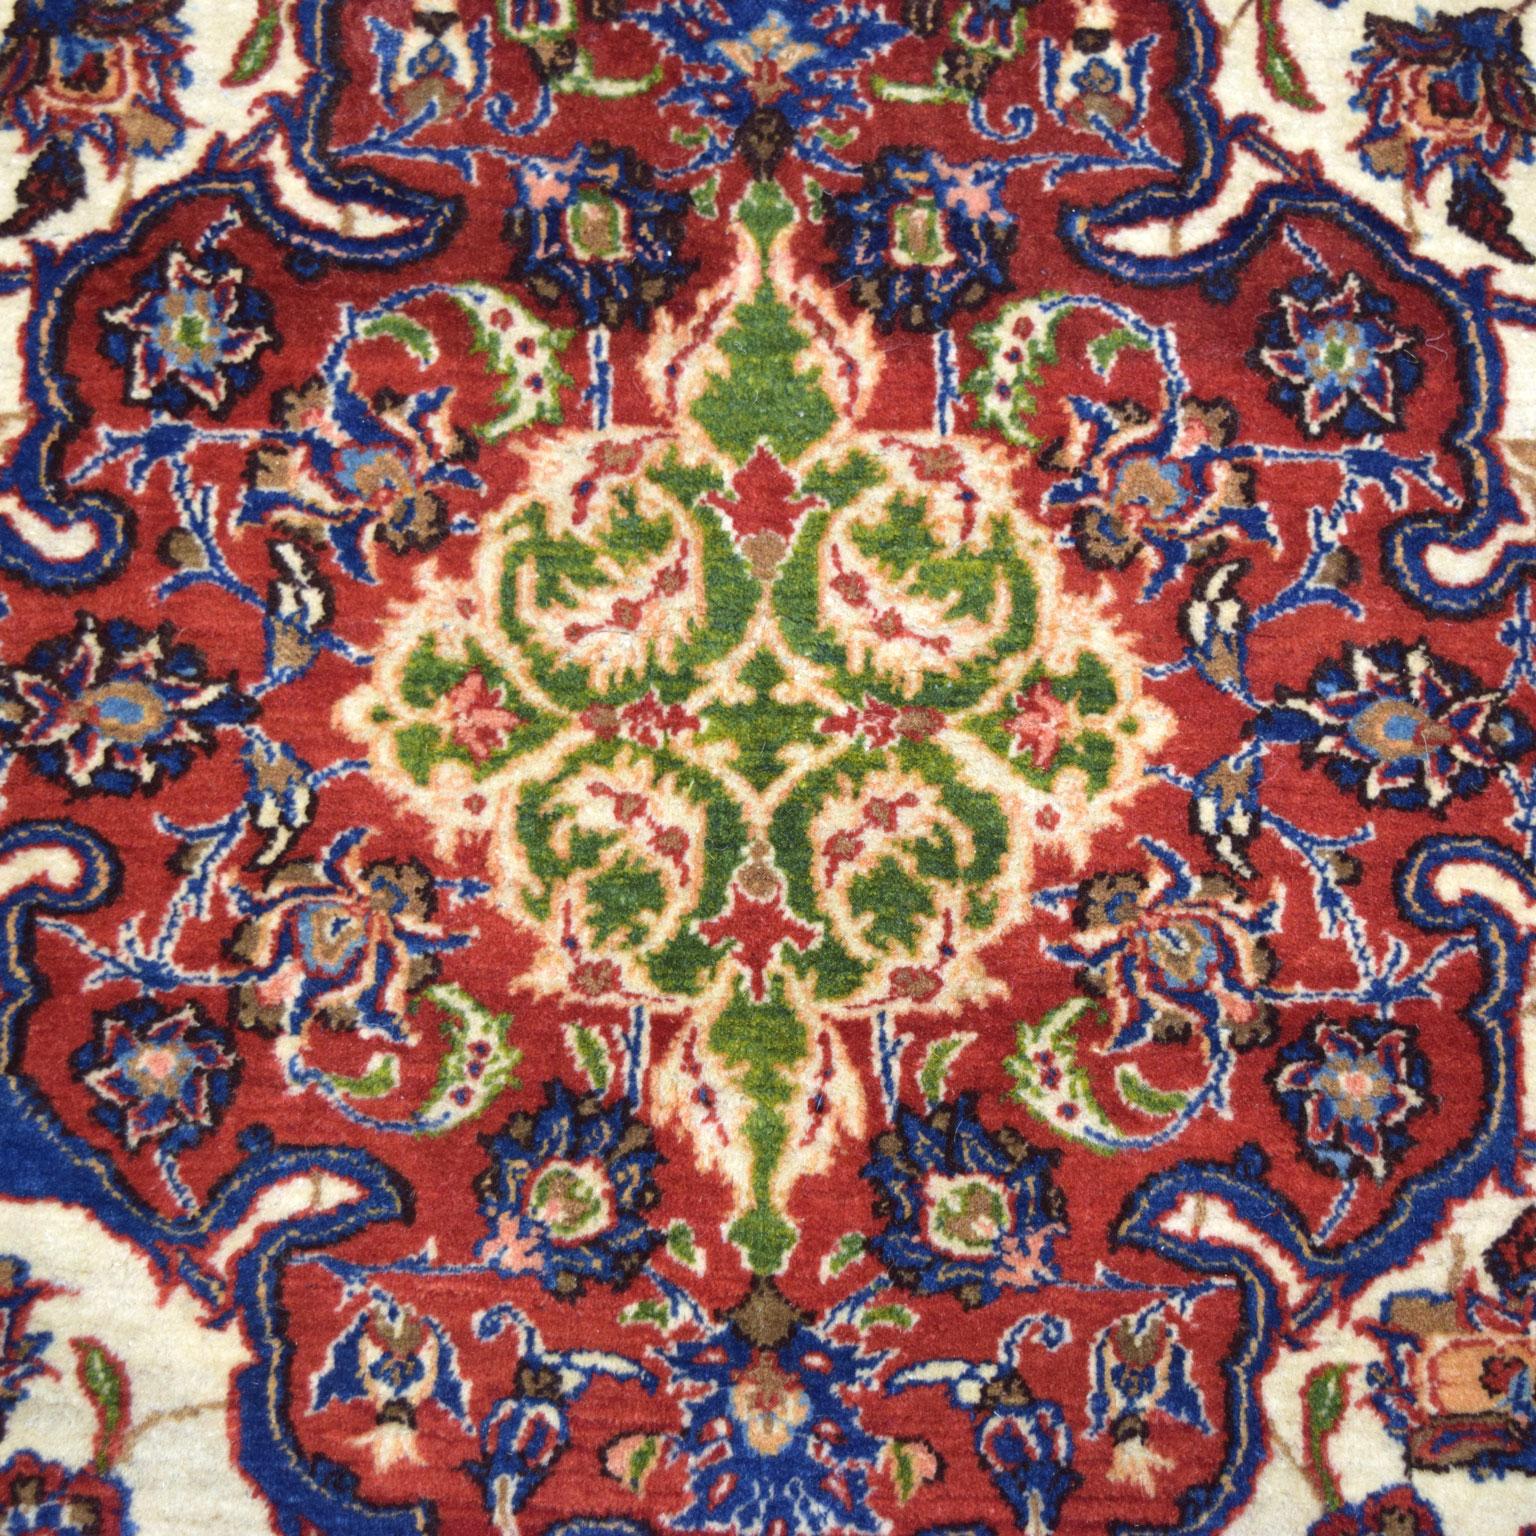 Vegetable Dyed Antique 1900s Woo Persian Isfahan Rug, Red, Cream, and Gold, 5' x 7' For Sale